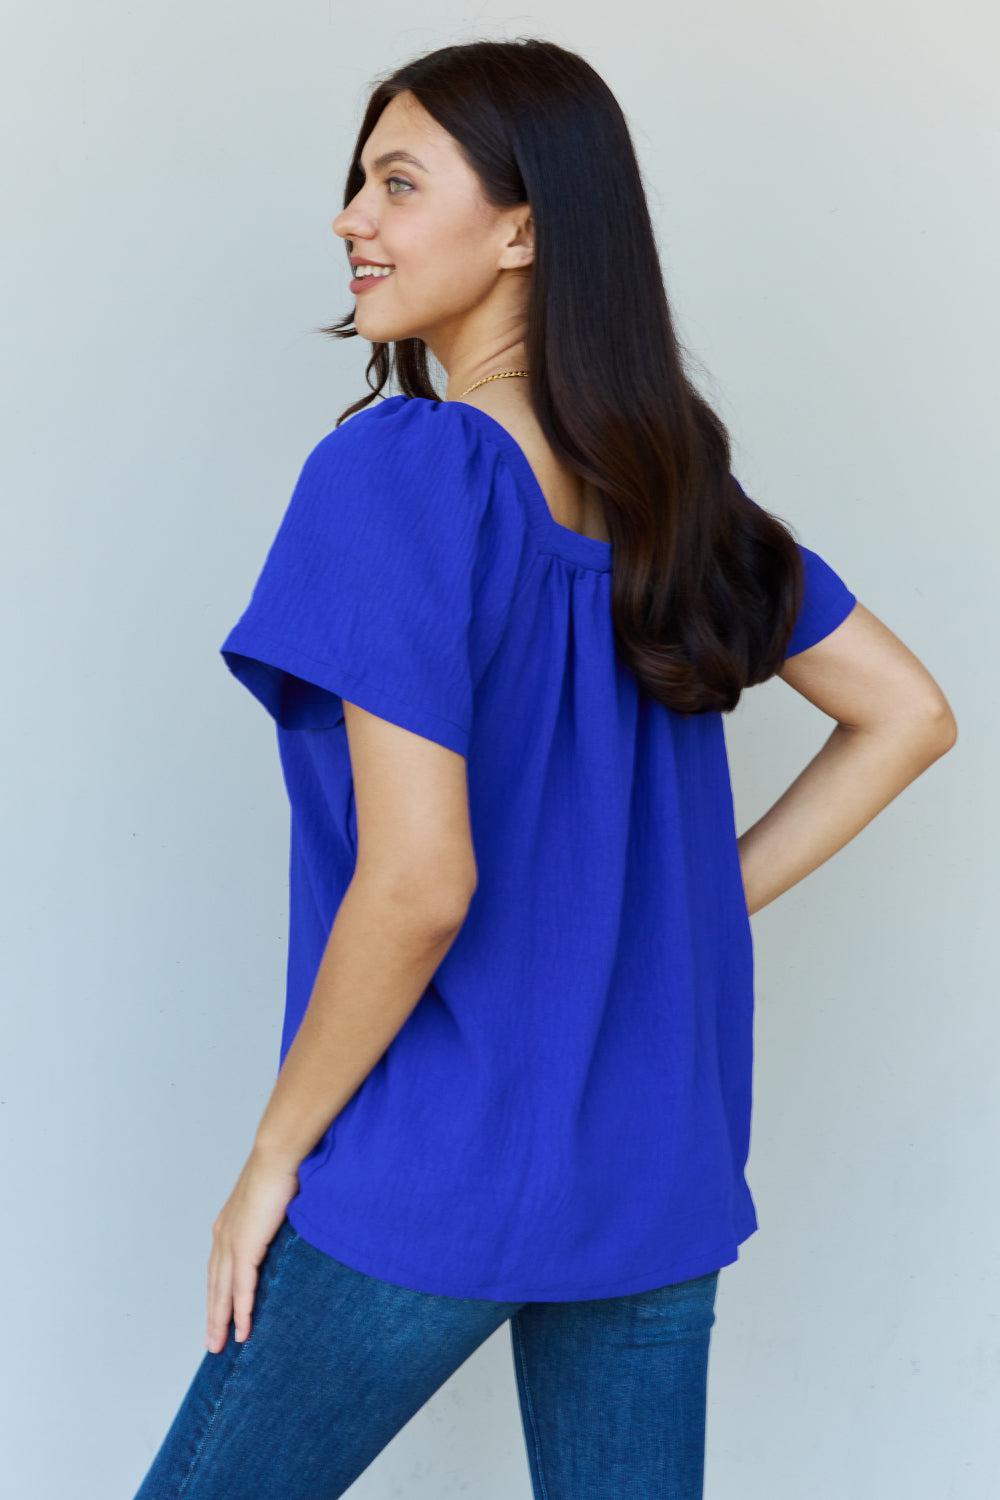 Ninexis Keep Me Close Square Neck Short Sleeve Blouse in Royal BLUE ZONE PLANET